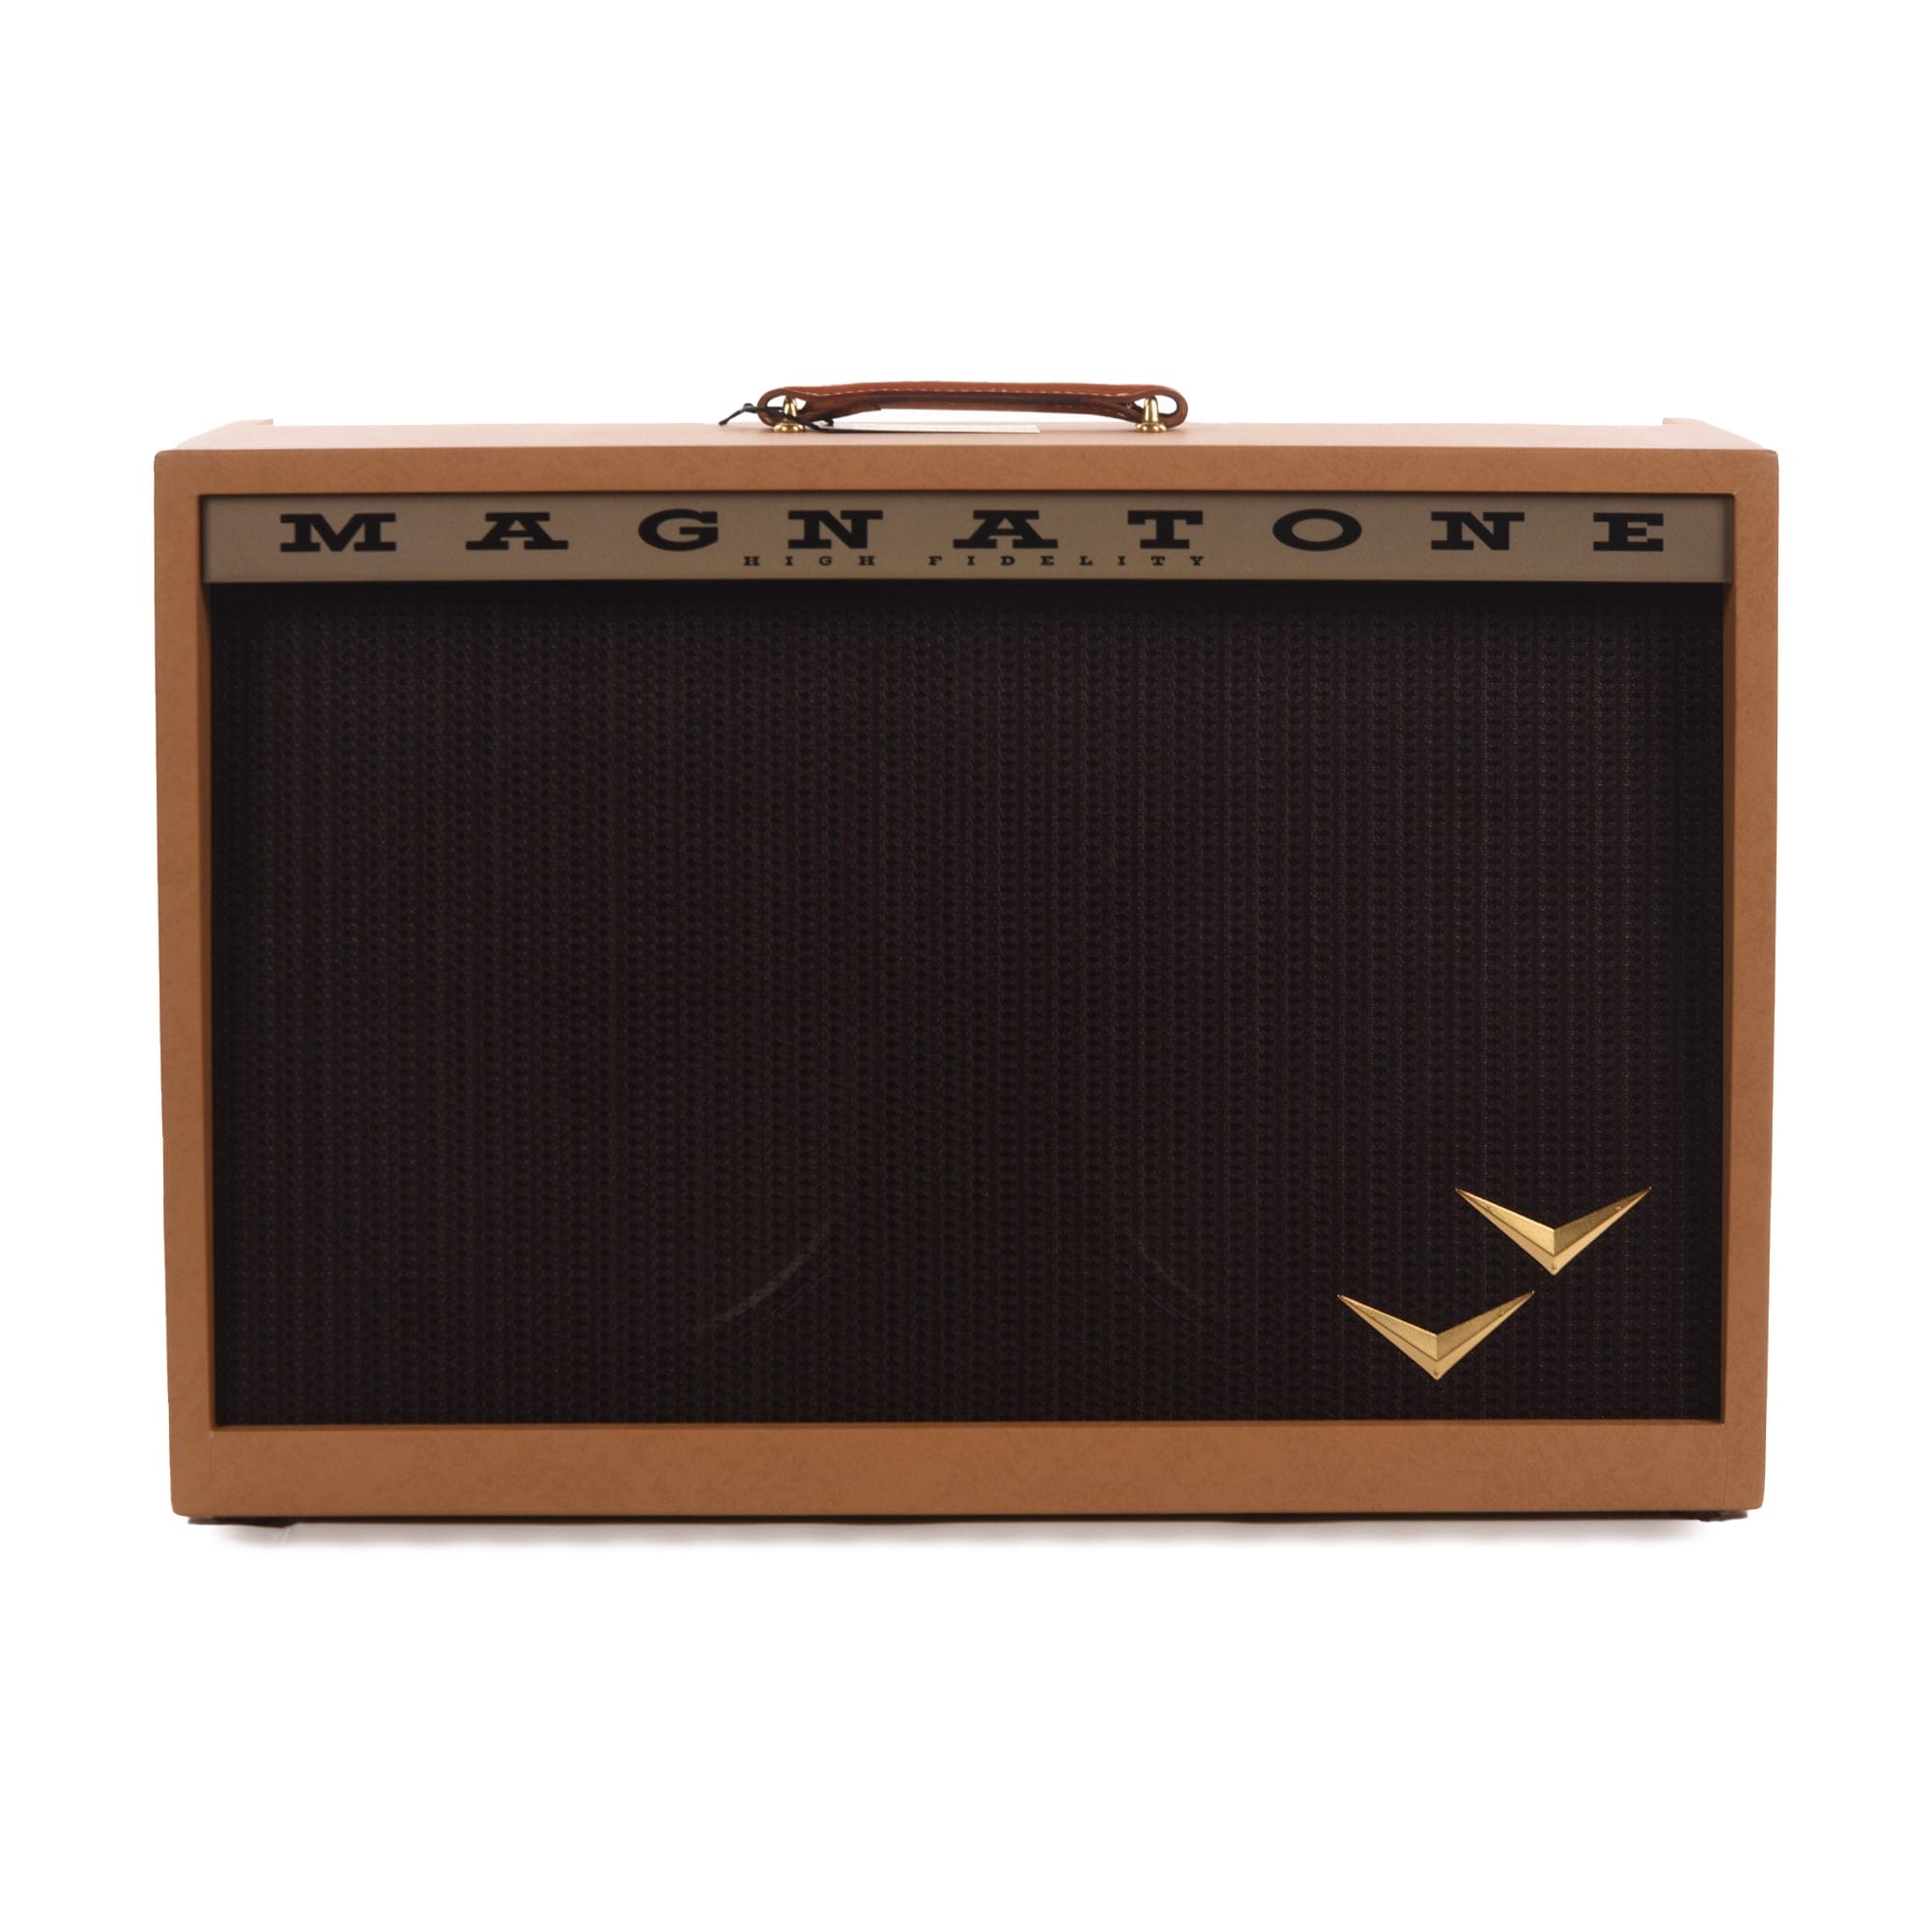 Magnatone Twilighter Stereo 22/22W 2x12 Combo Amp Camel w/ Oxblood Grill Amps / Guitar Combos